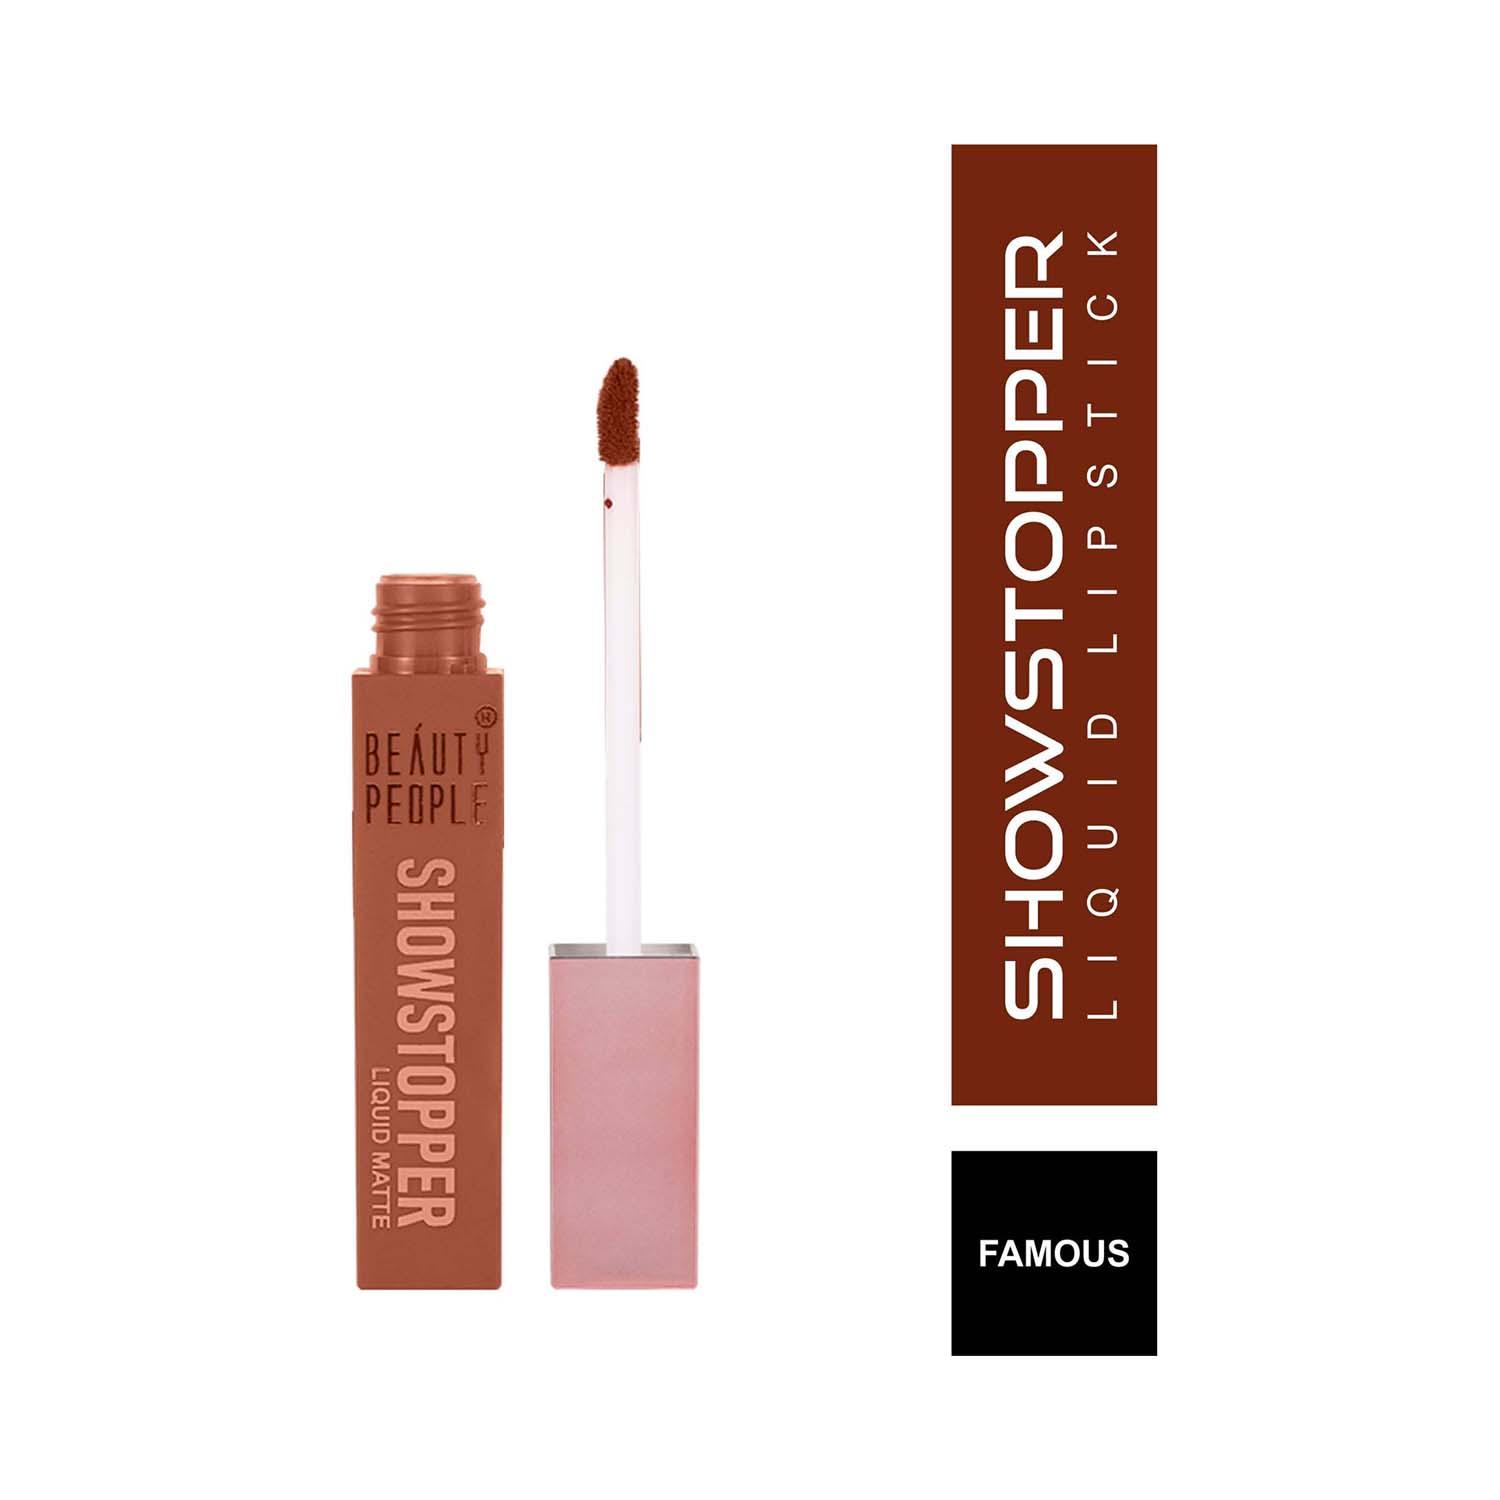 Beauty People | Beauty People Showstopper Liquid Lip Color with SPF 15 & Vitamin E - 01 Famous (4ml)